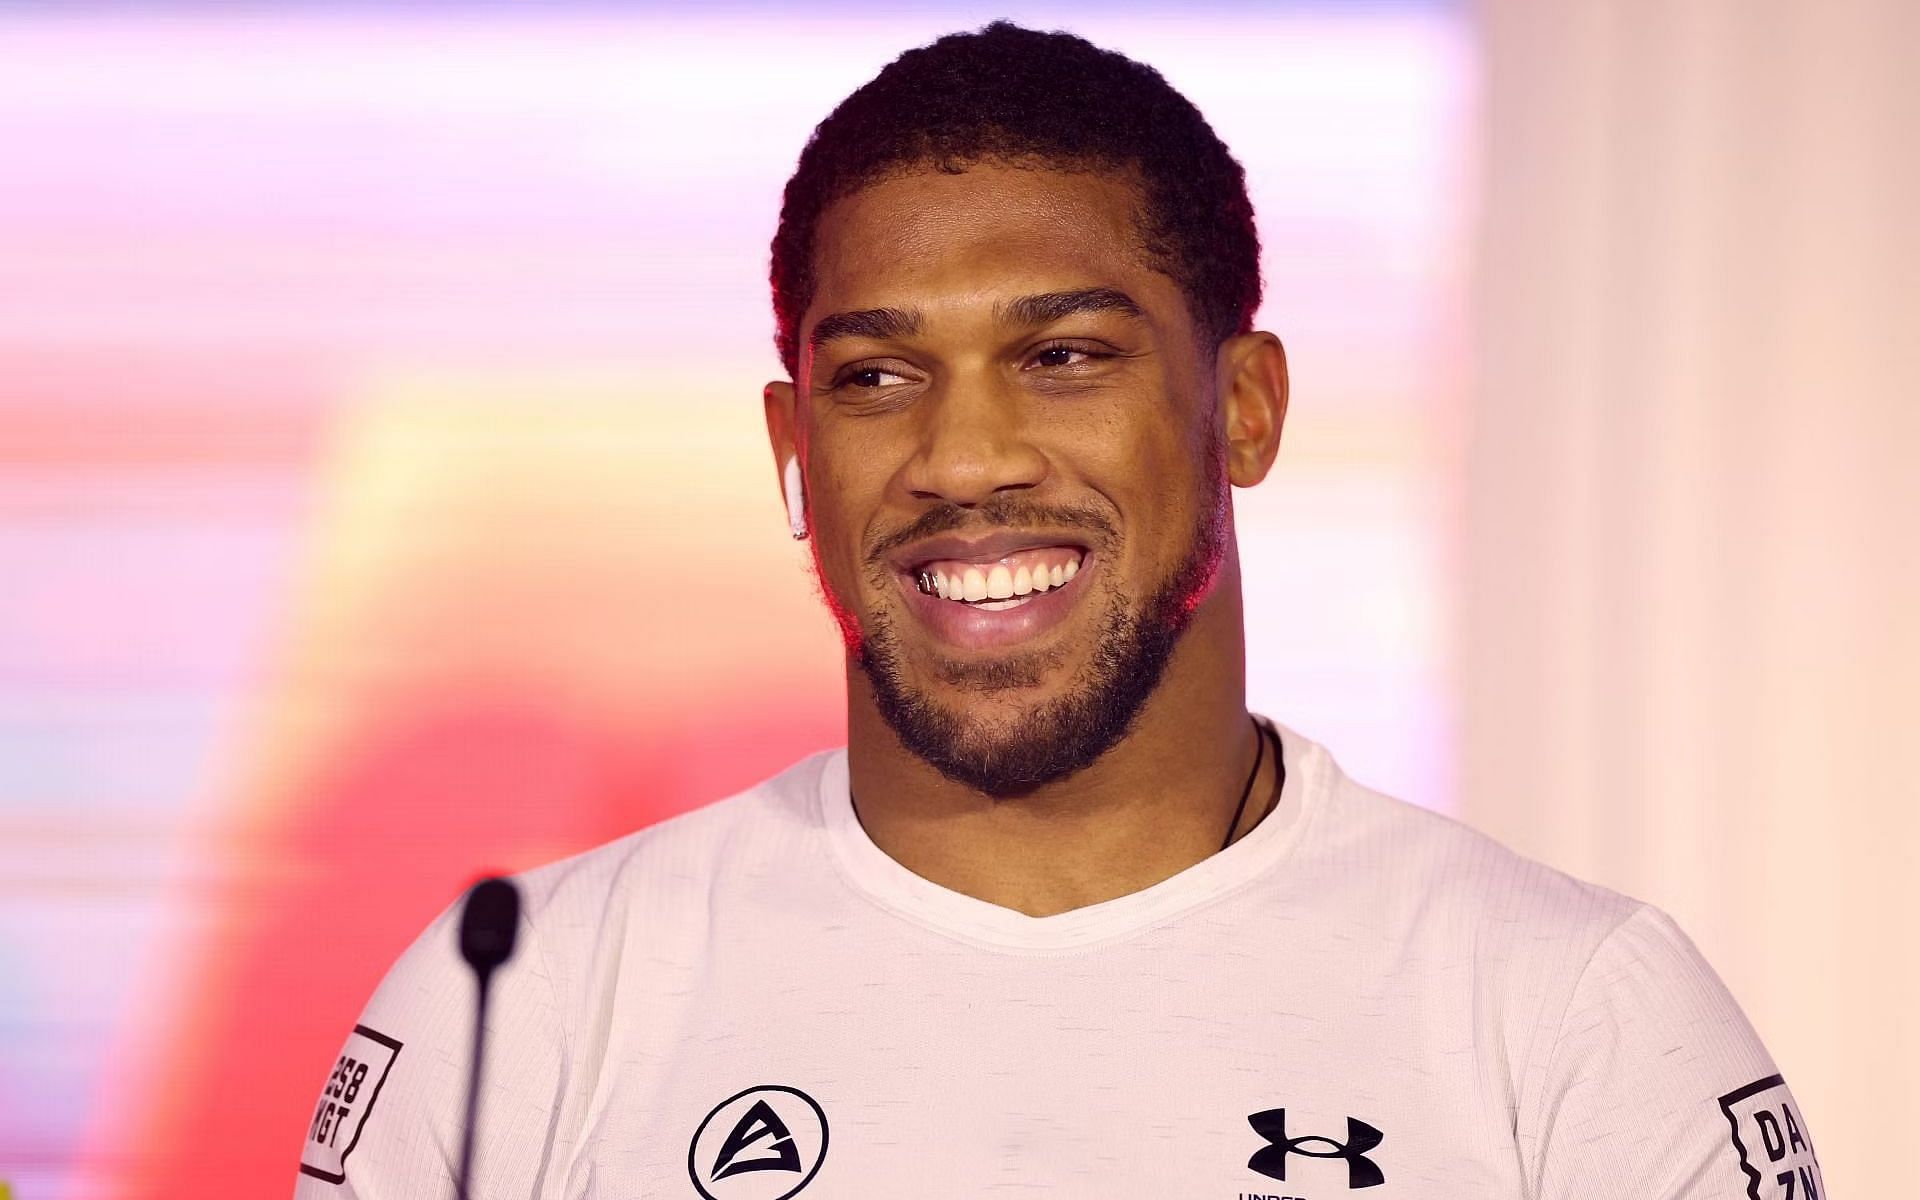 Anthony Joshua (pictured) has three potential opponents for his next fight, says promoter Eddie Hearn [Image Courtesy: @GettyImages]